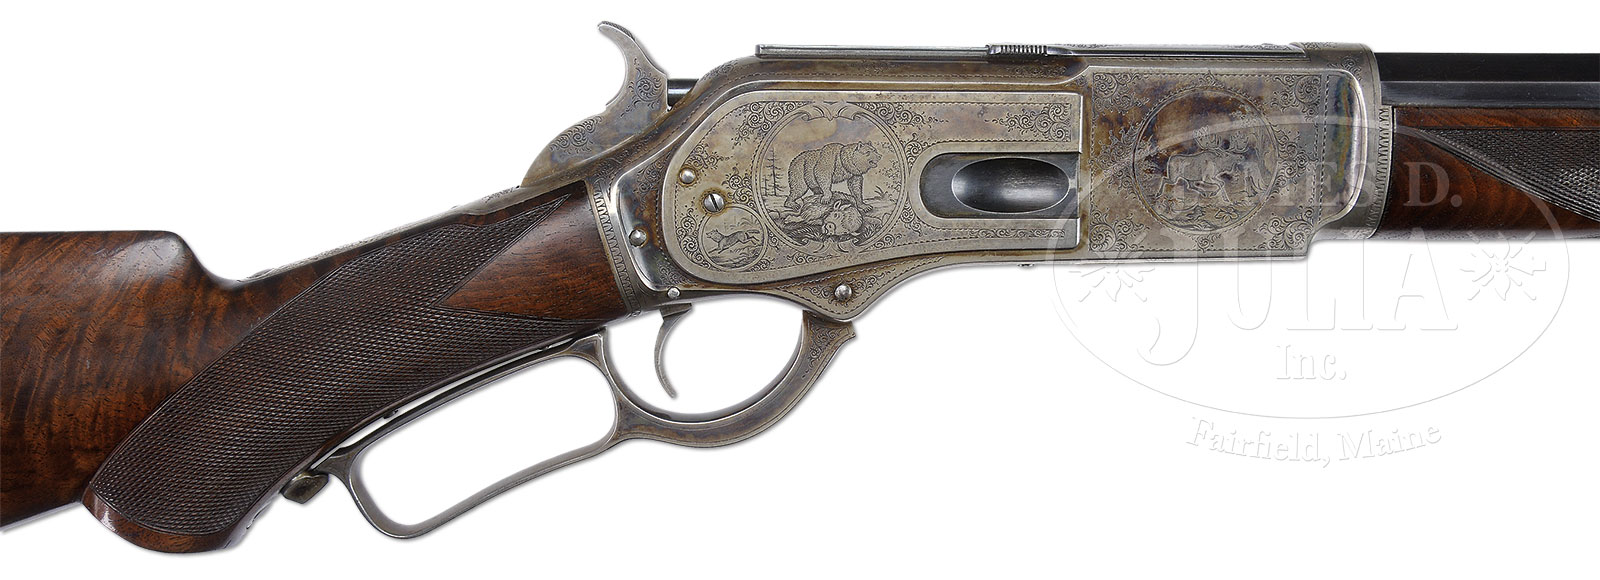 EXTRAORDINARY DELUXE JOHN ULRICH ENGRAVED WINCHESTER MODEL 1876 LEVER ACTION RIFLE, IDENTIFIED TO FAMED SPORTSMAN COL. ARCHIBALD ROGERS WITH FACTORY LETTER.